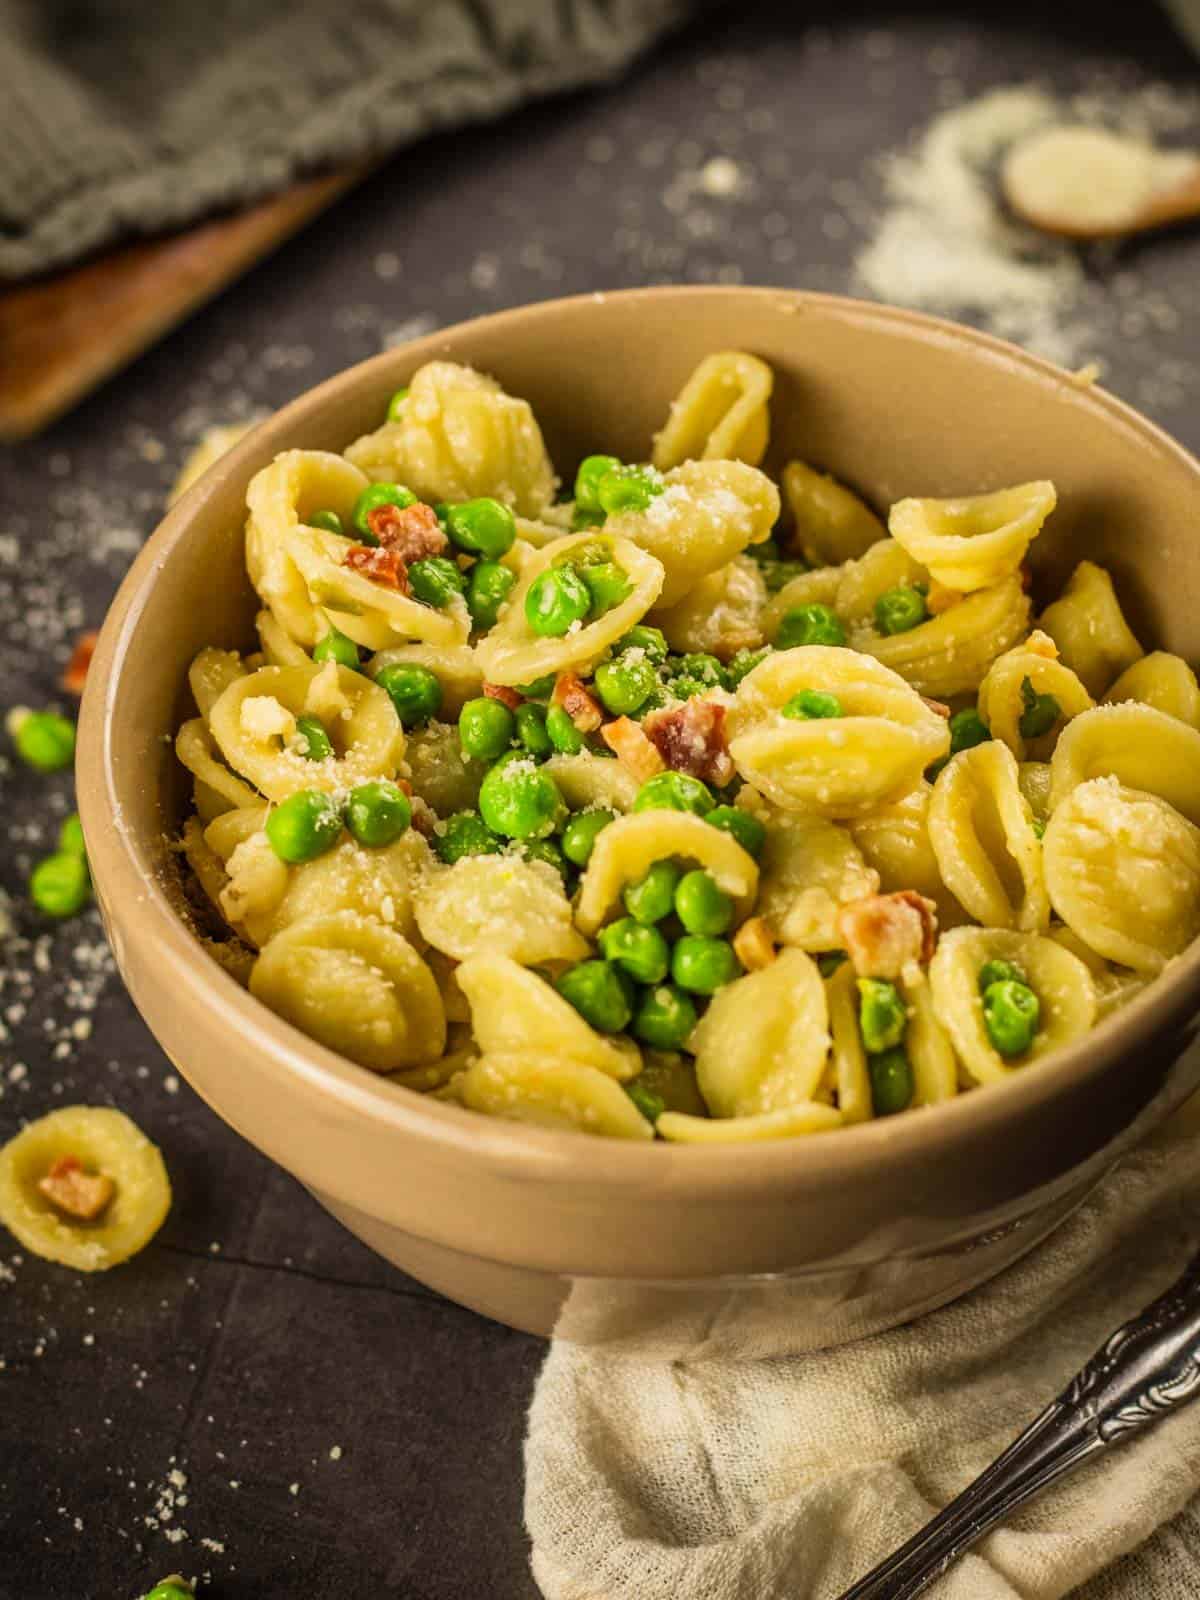 tan bowl filled with orecchiette pasta, pancetta, peas and parmesan cheese